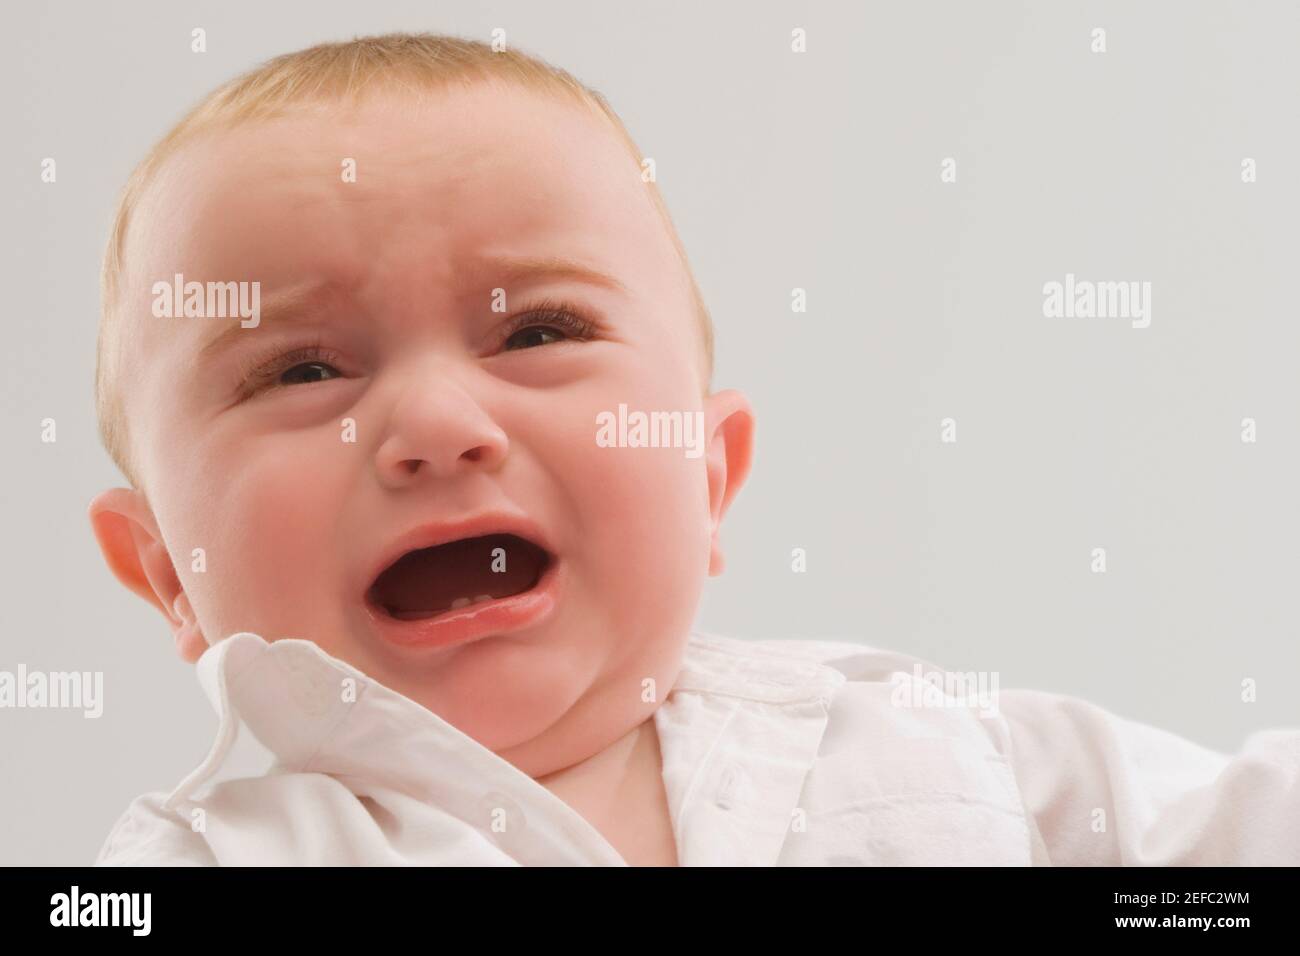 Close up of a baby boy crying Stock Photo